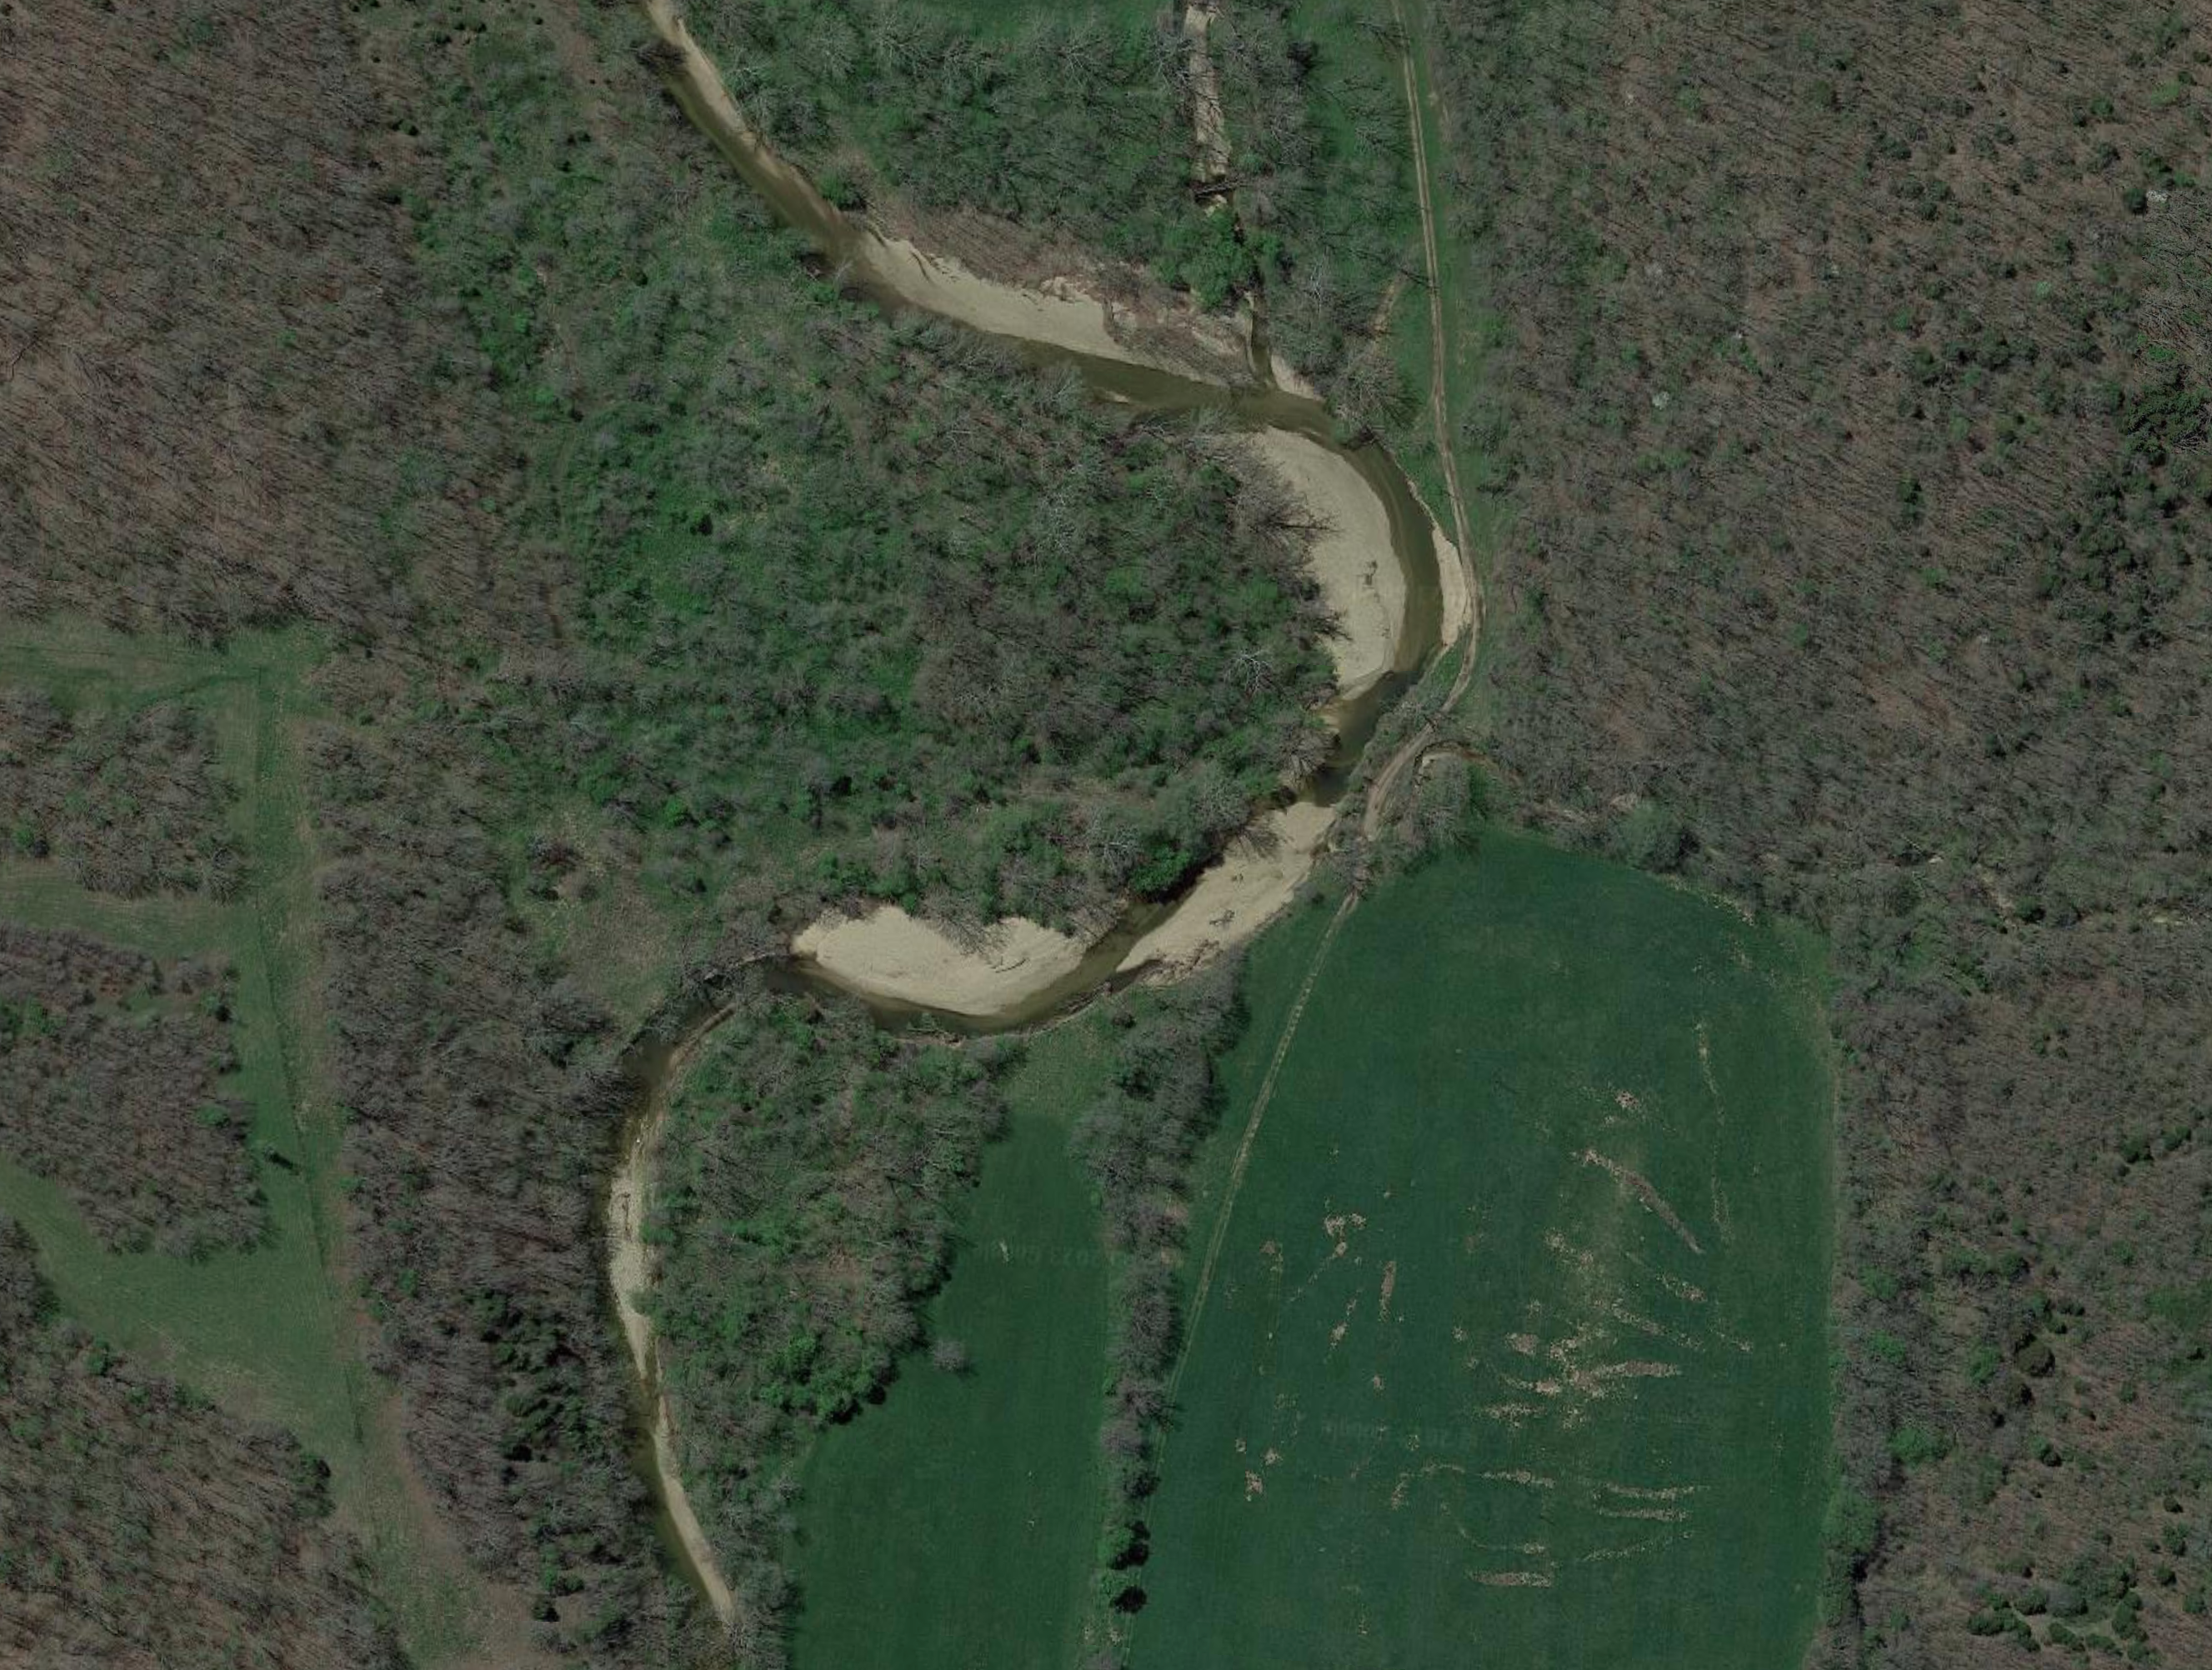 Buck bedding in Oxbows (River Bends)